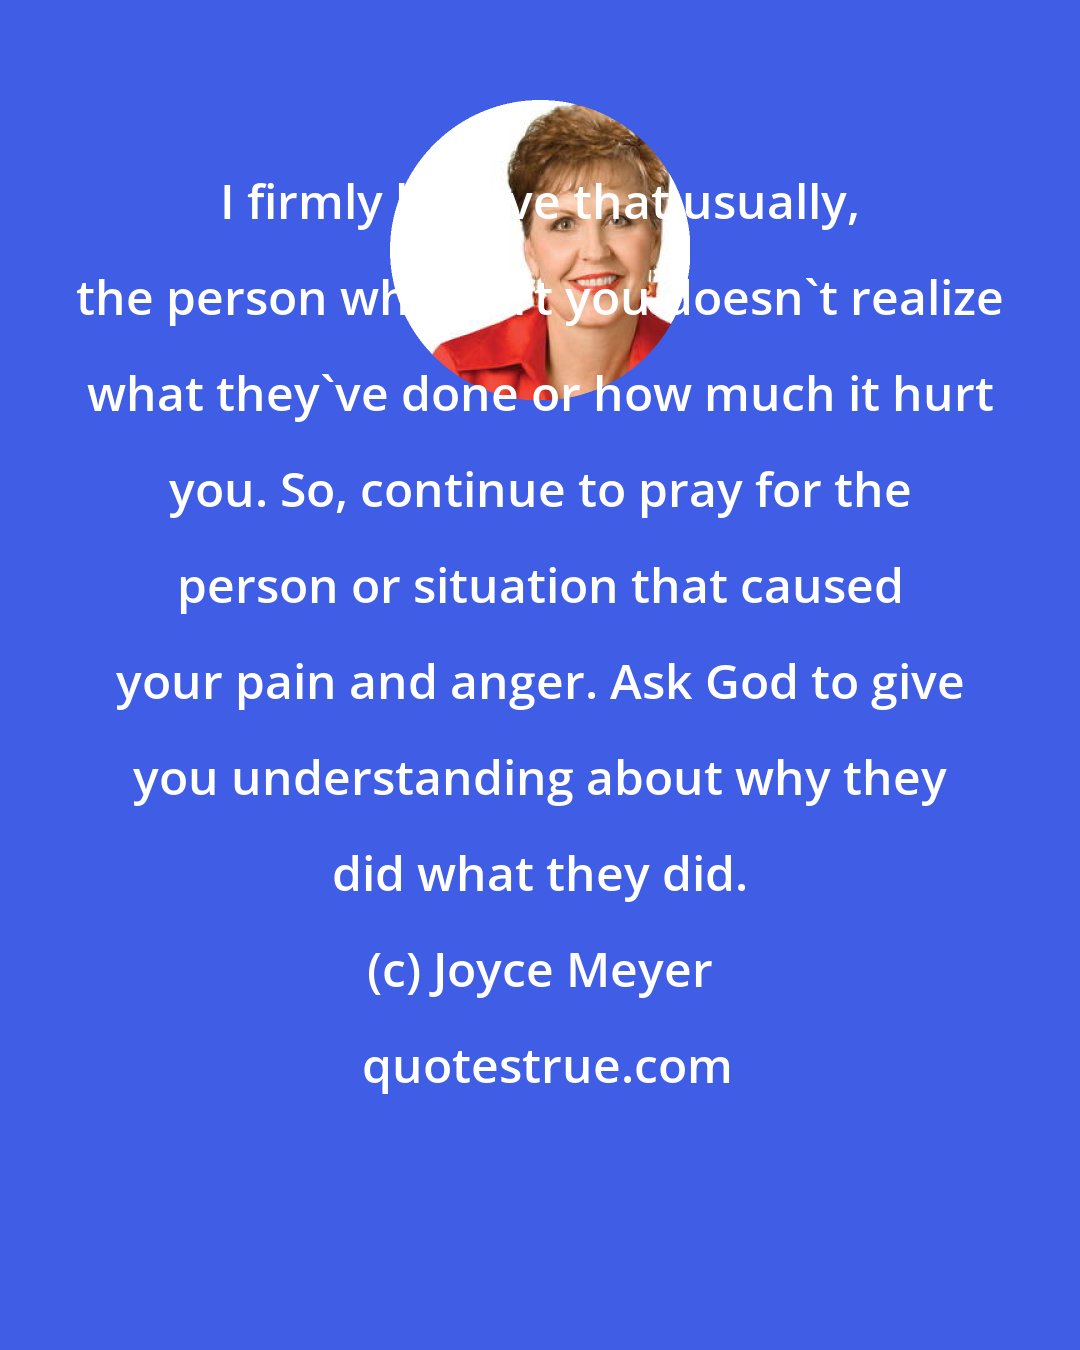 Joyce Meyer: I firmly believe that usually, the person who hurt you doesn't realize what they've done or how much it hurt you. So, continue to pray for the person or situation that caused your pain and anger. Ask God to give you understanding about why they did what they did.